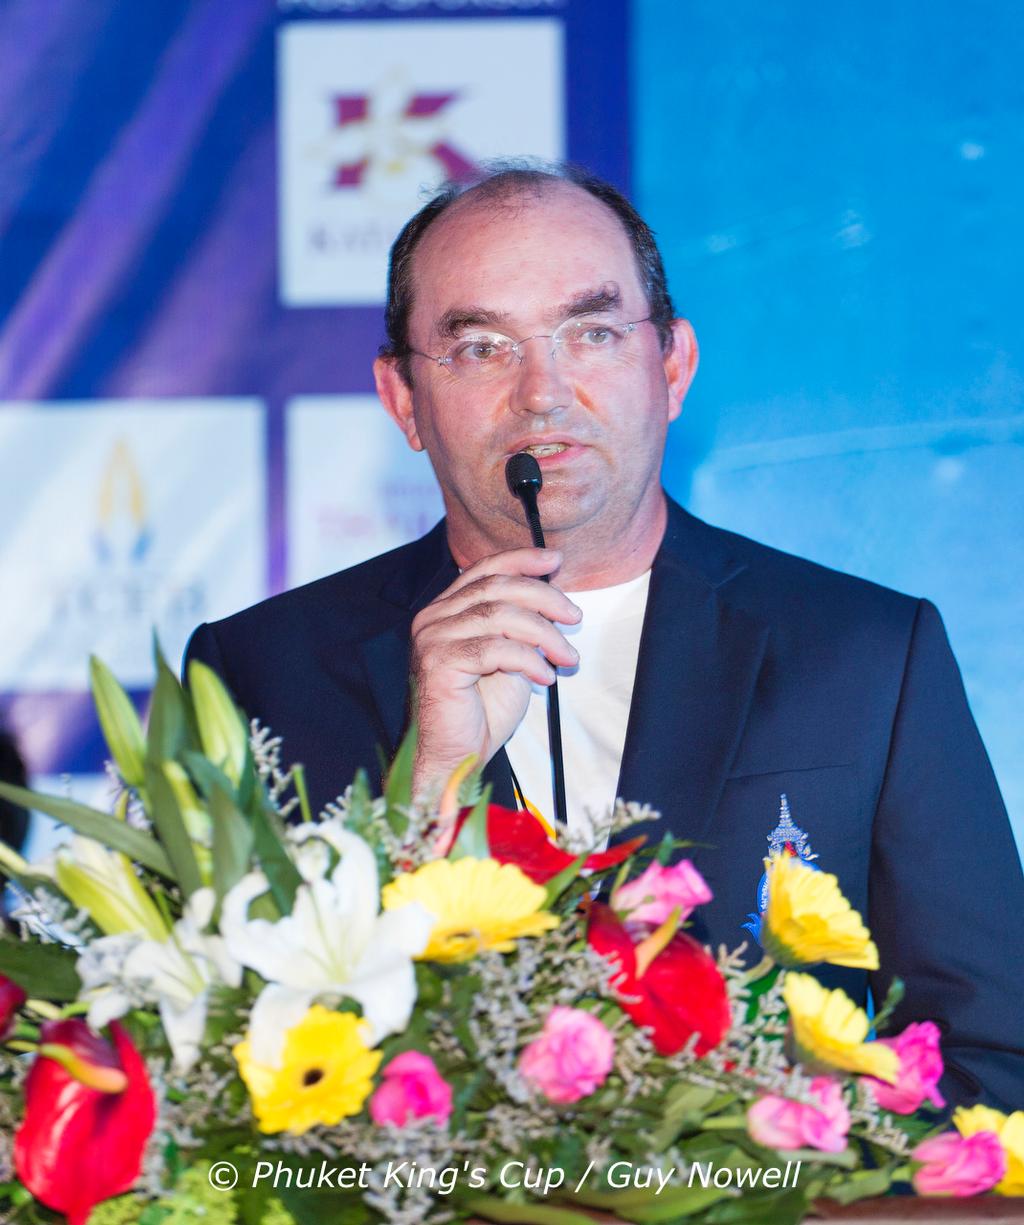 Kevin Whitcraft, Chairman of the Organising Committee. Phuket King's Cup 2015 © Guy Nowell / Phuket King's Cup